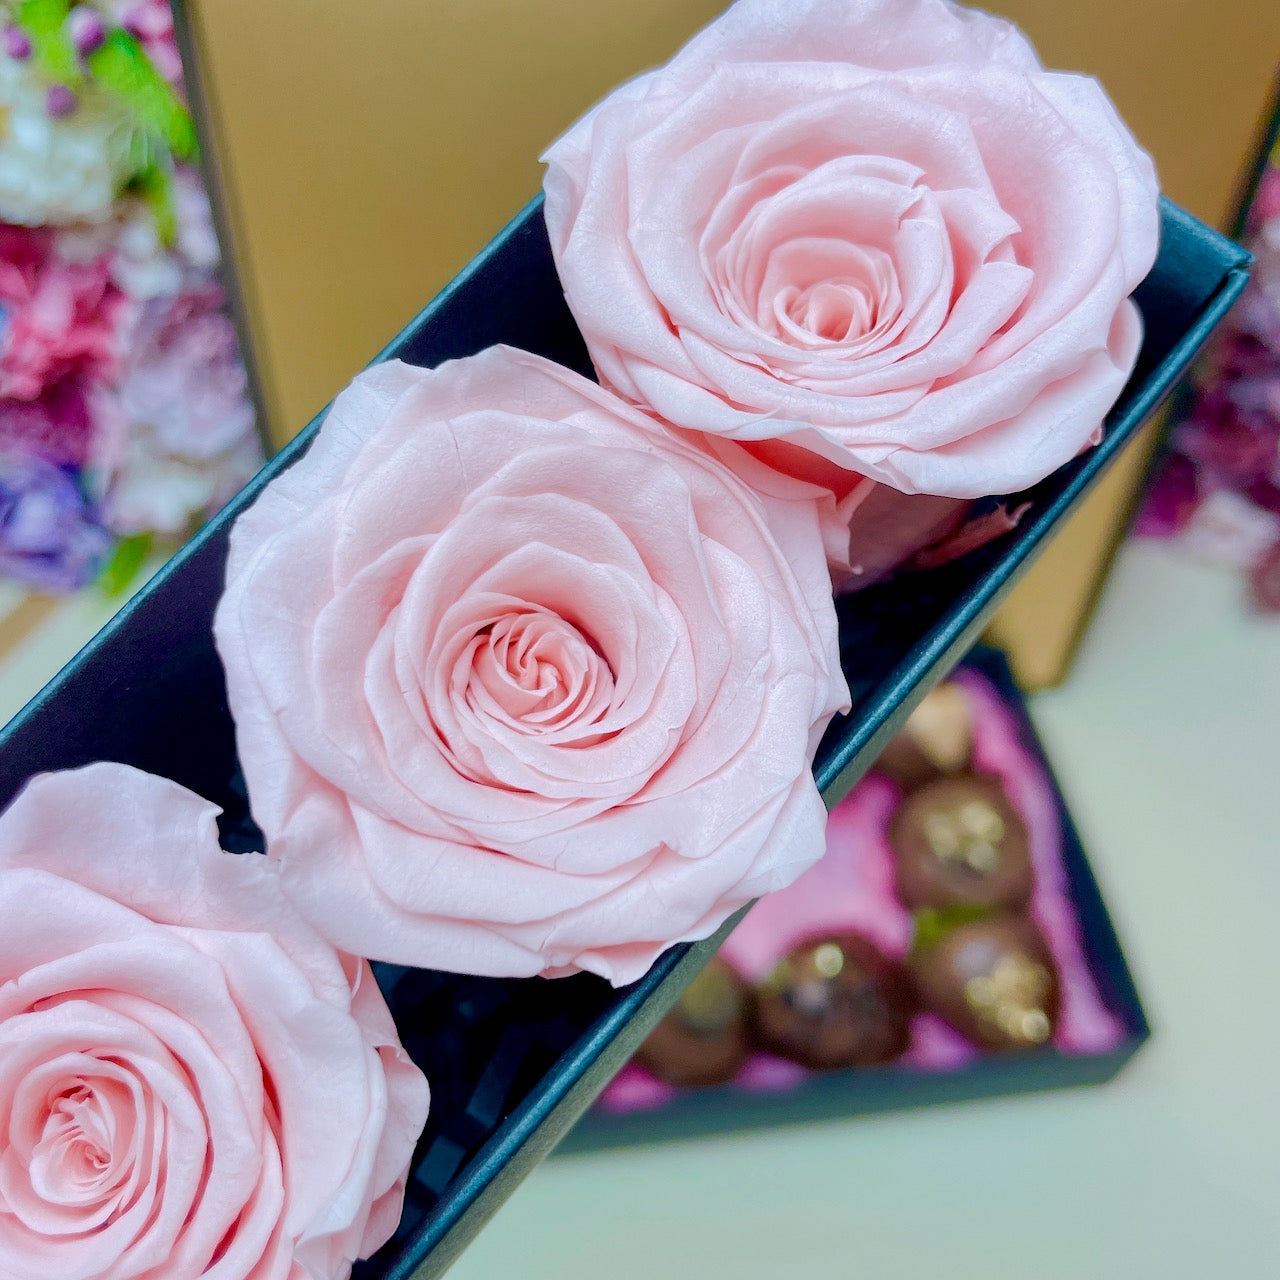  Preserved Roses Box with Same-Day Delivery Adelaide. preserved-deluxe-box, eternal roses, infinity roses, everlasting flowers